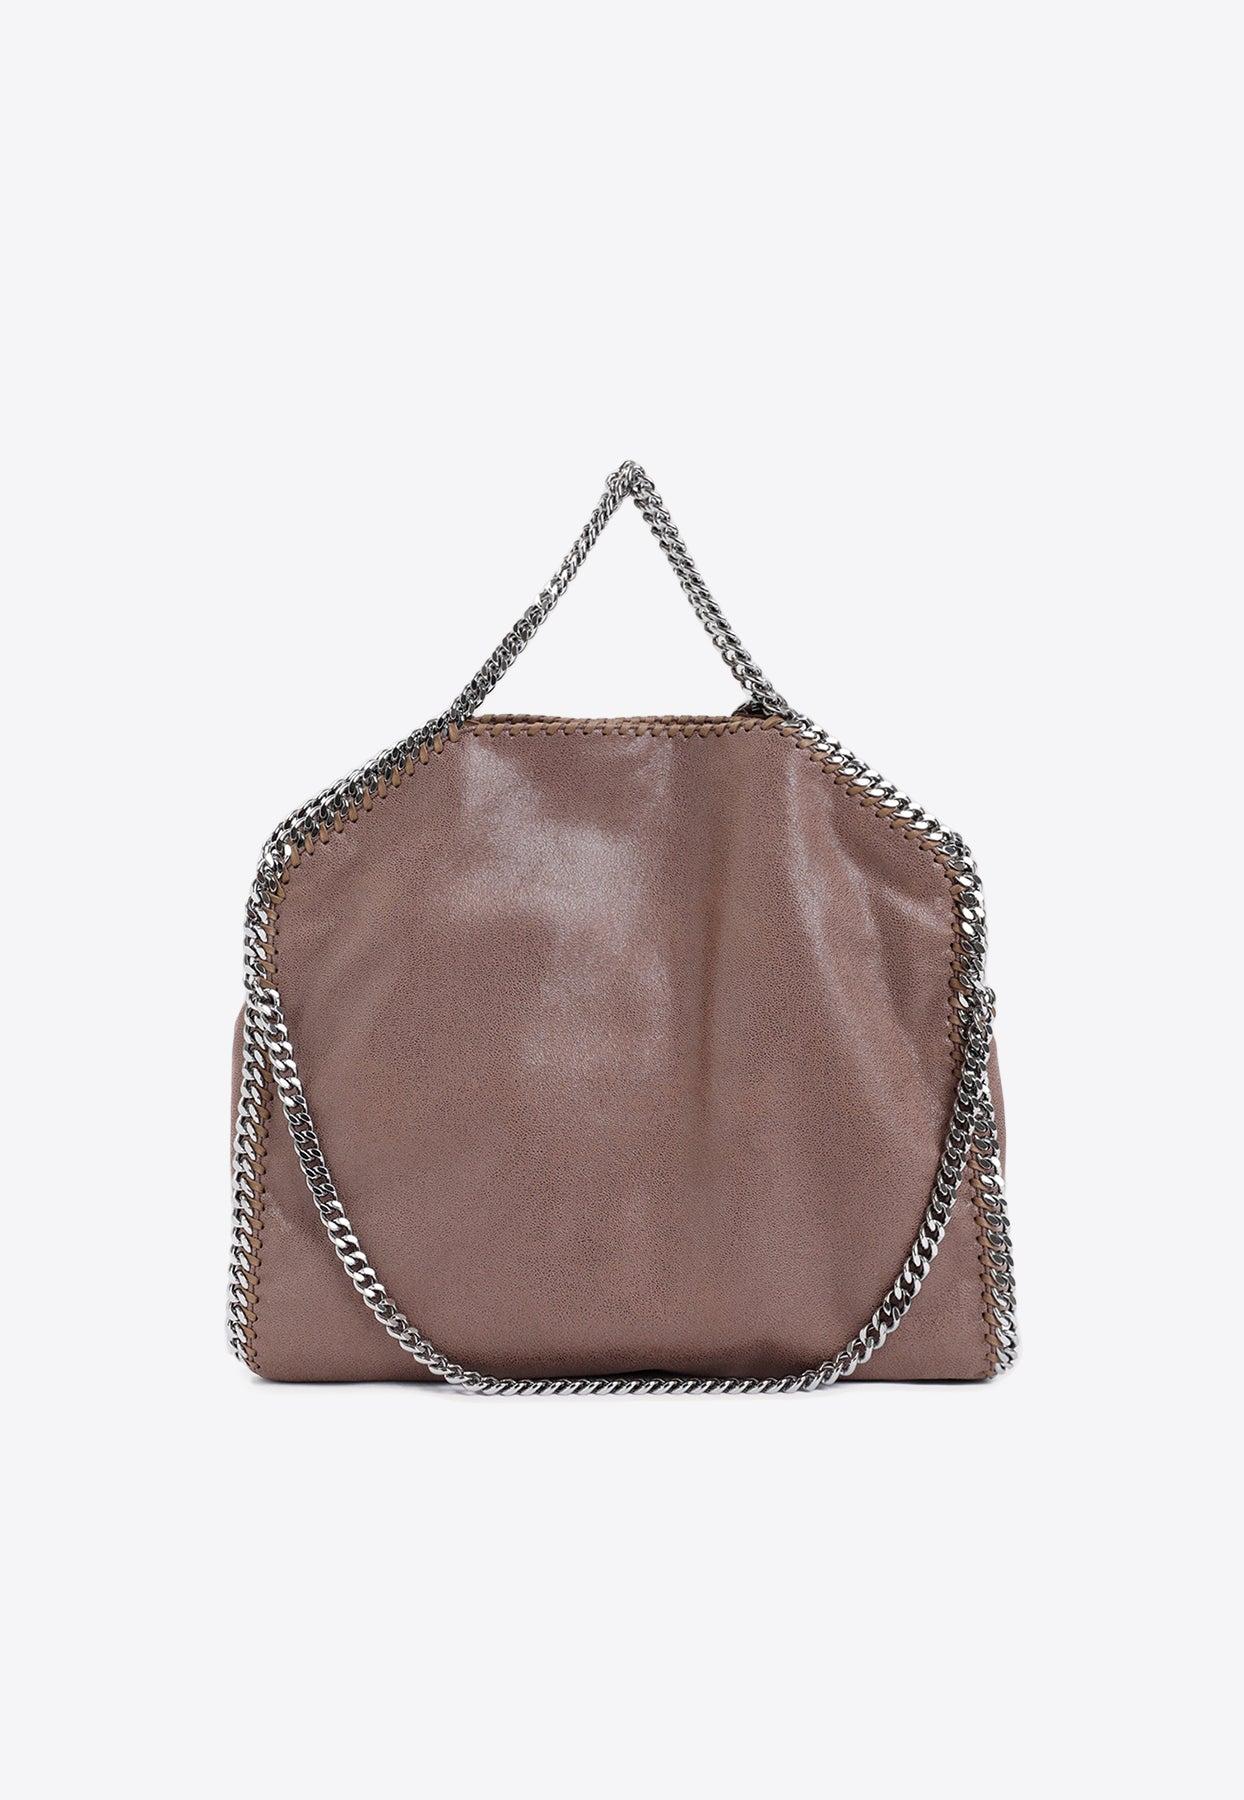 Stella McCartney 3 Chain Falabella Fold Over Tote Bag in Brown | Lyst